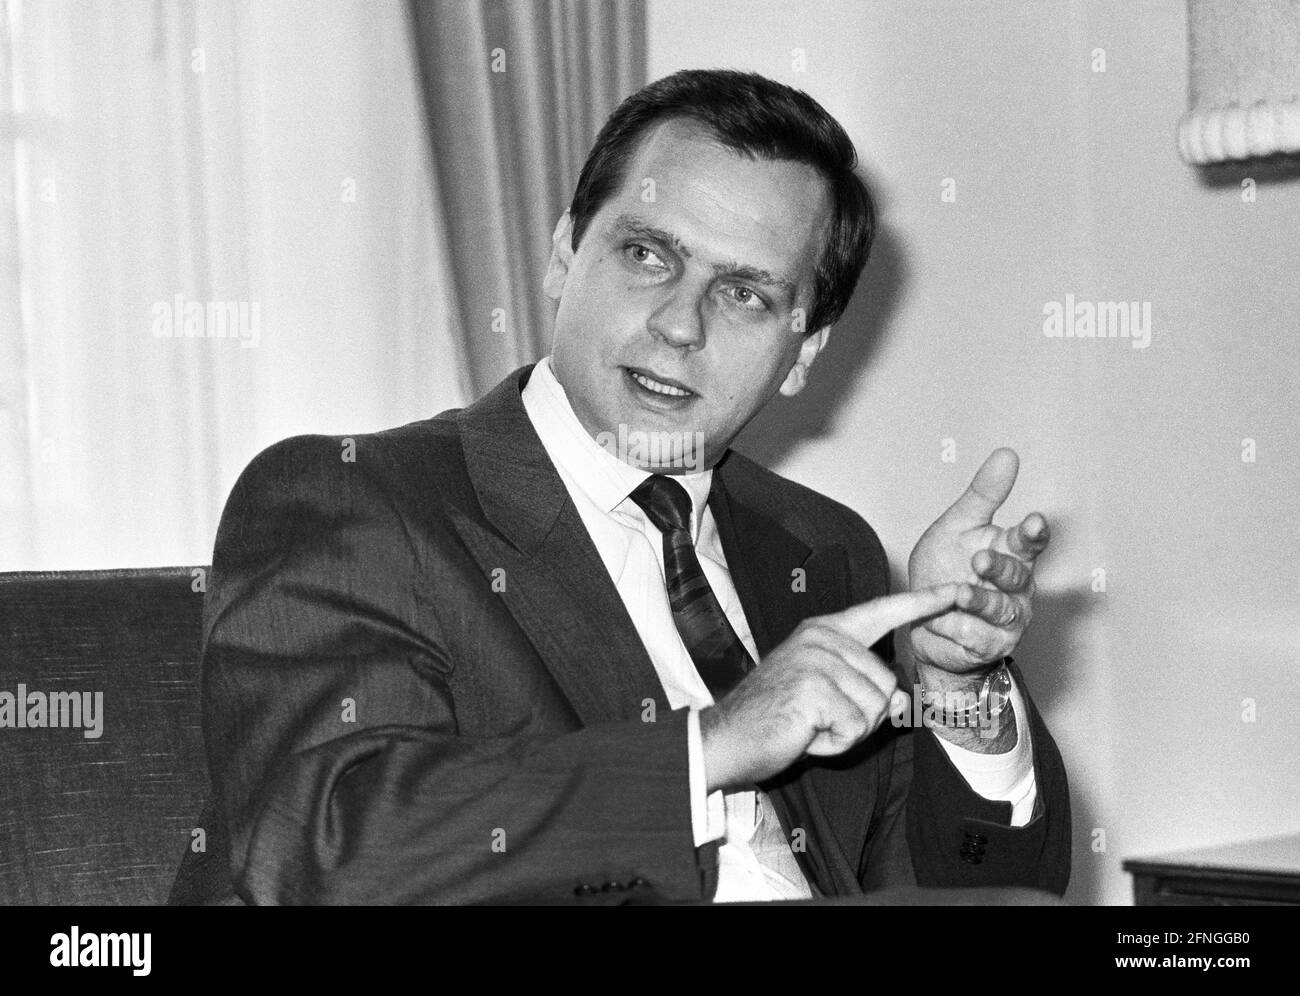 Germany, Bonn 23.10.1990. Archive No: 21-01-17 Federal Minister of Transport Krause Photo: Federal Minister of Transport Guenther Krause [automated translation] Stock Photo